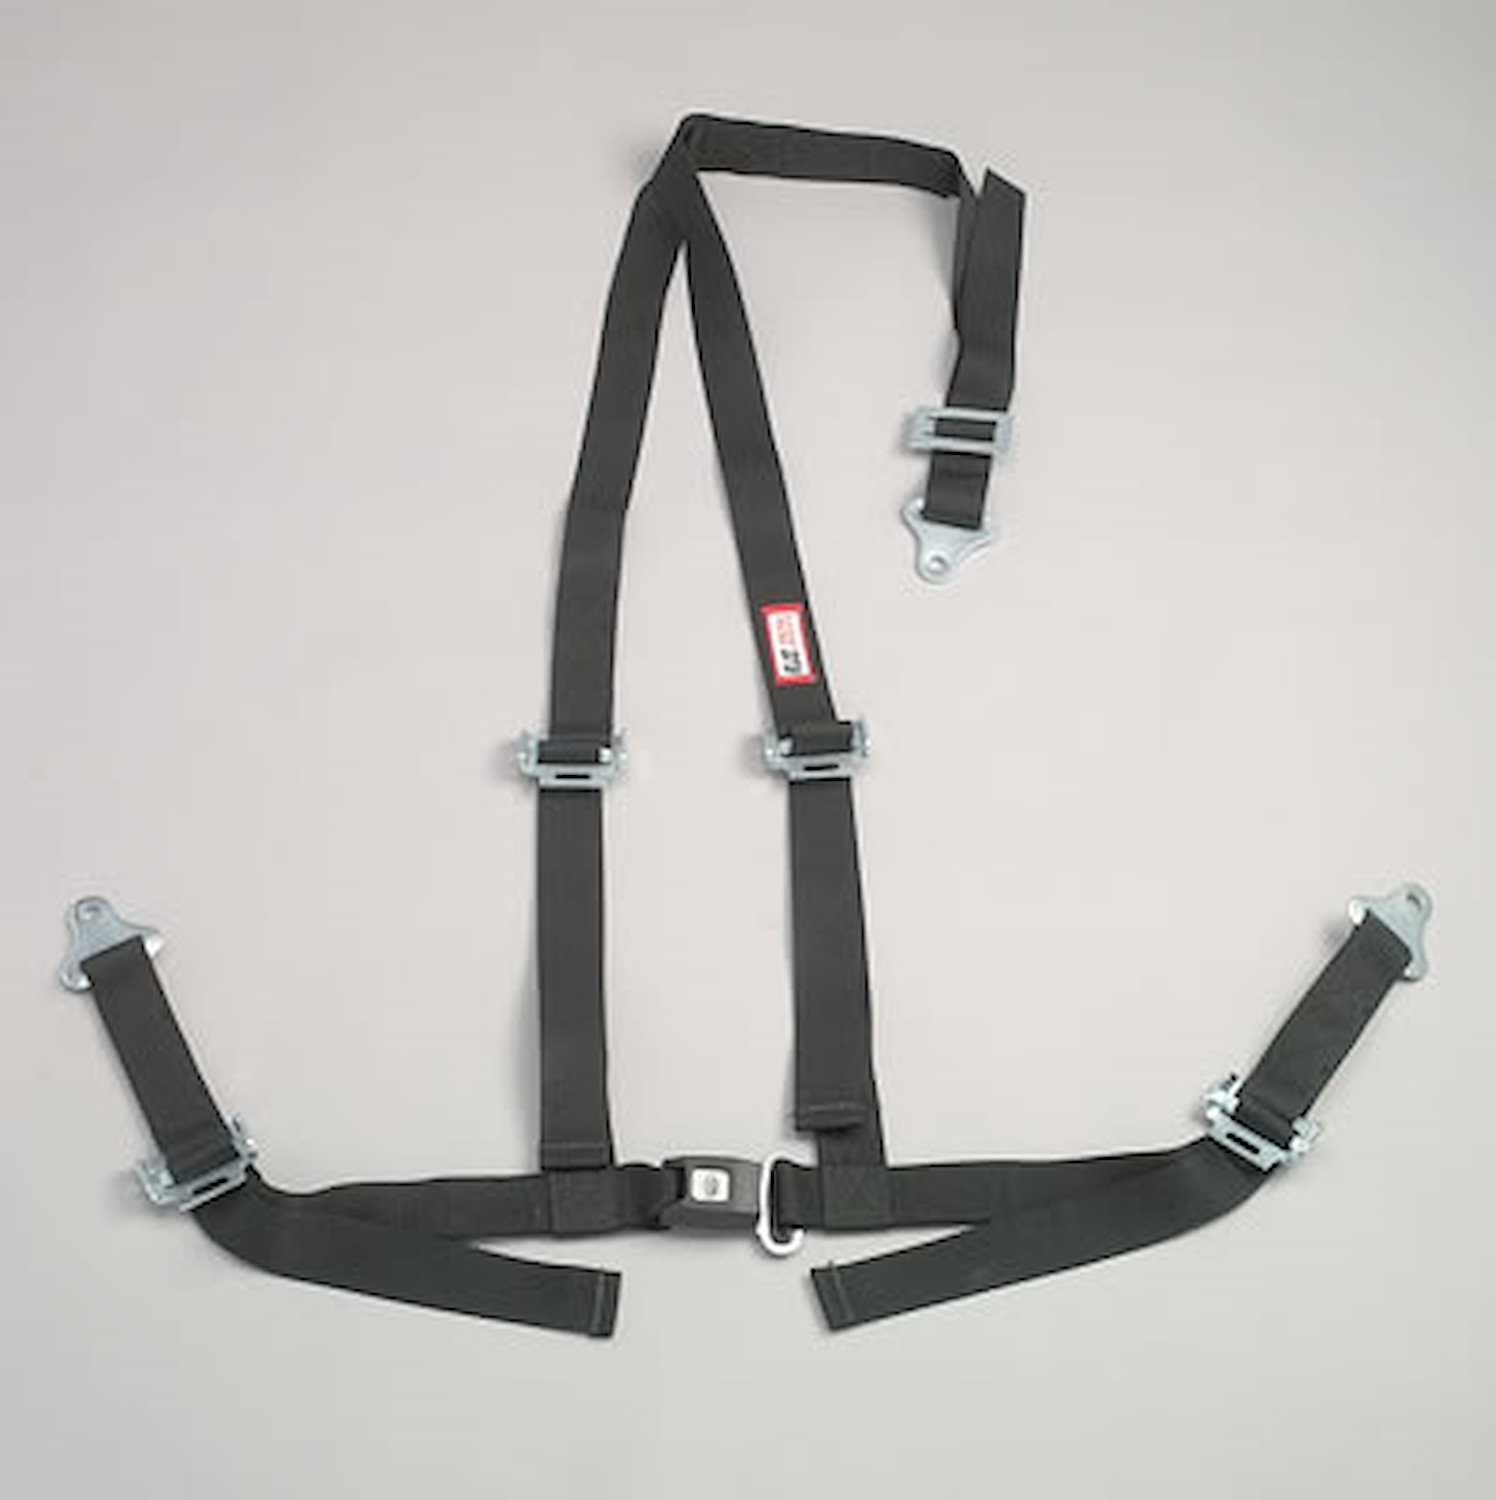 NON-SFI B&T HARNESS 2 PULL DOWN Lap Belt SNAP 2 S. H. Individual FLOOR Mount WRAP/BOLT w/STERNUM STRAP GRAY